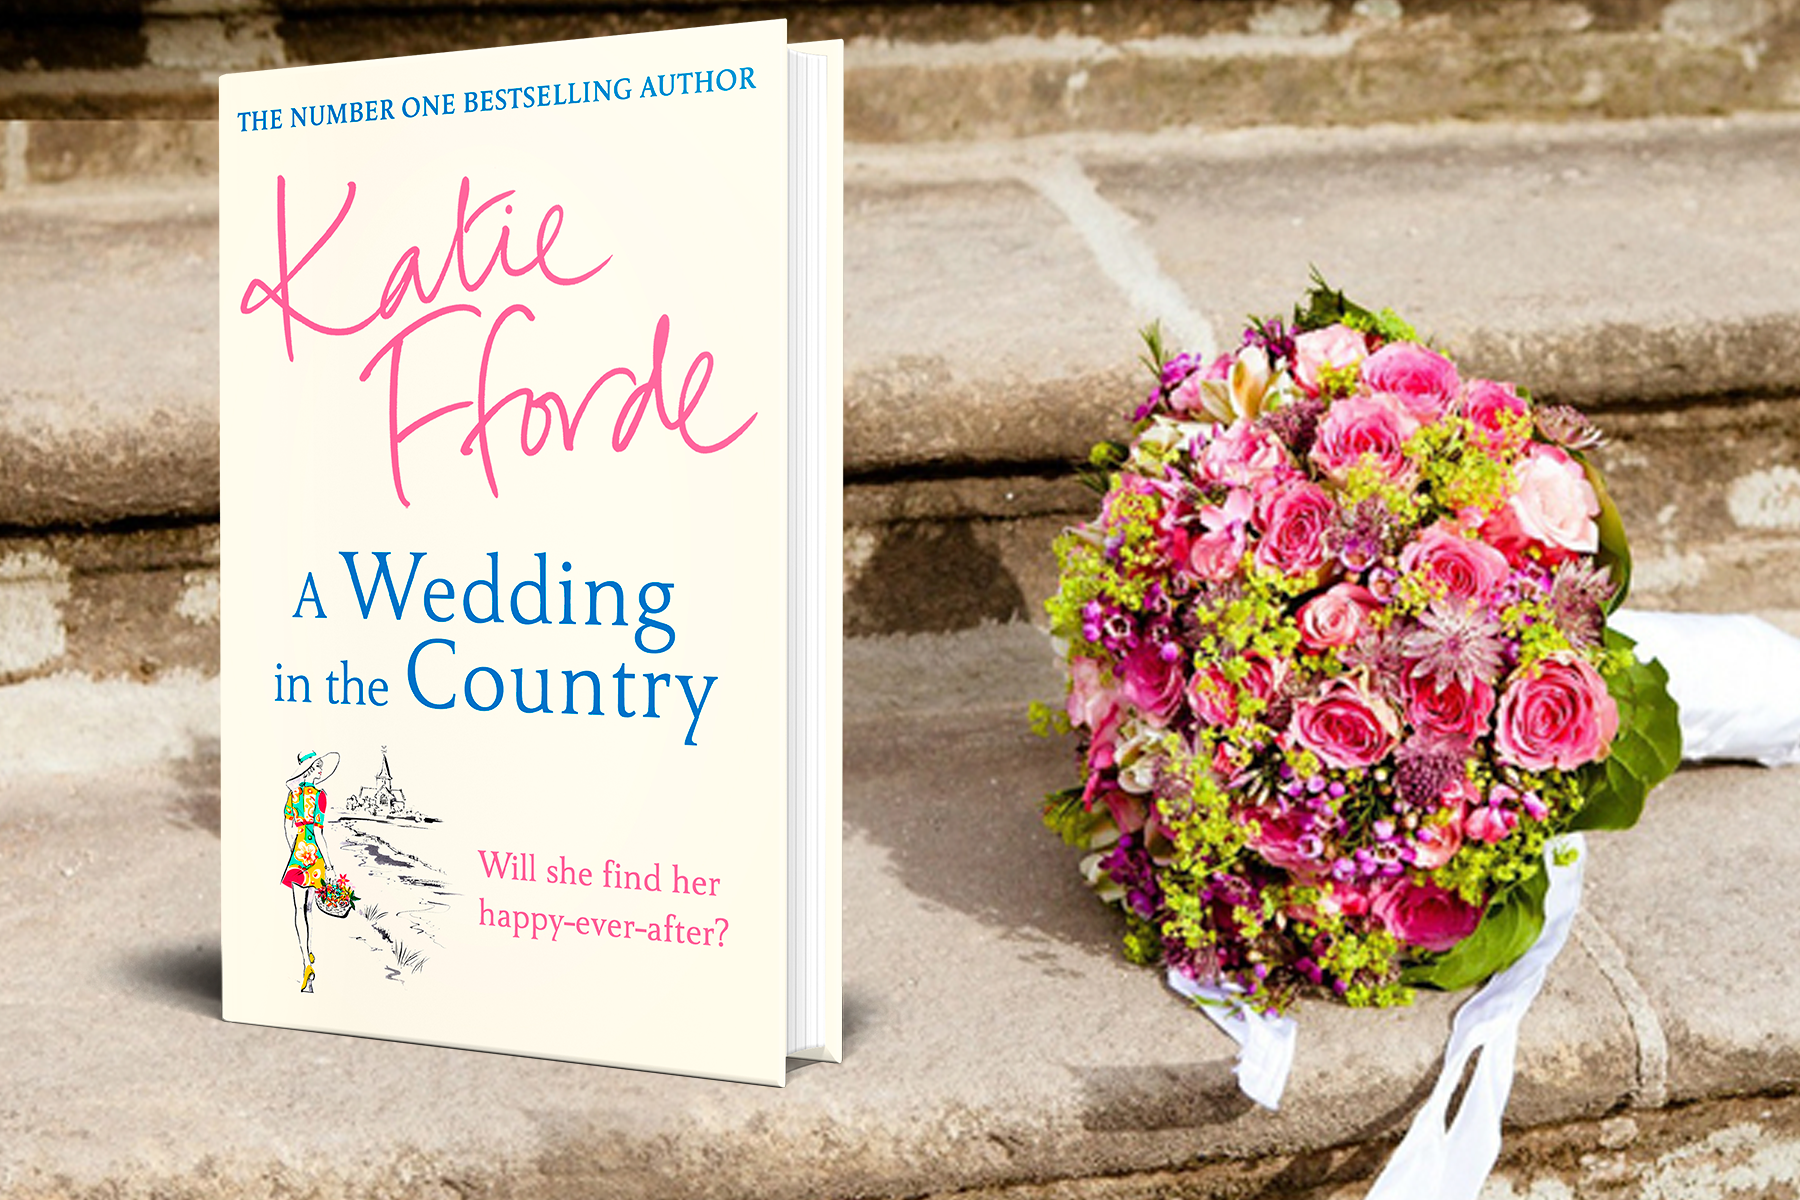 Katie Fforde's A Wedding in the Country